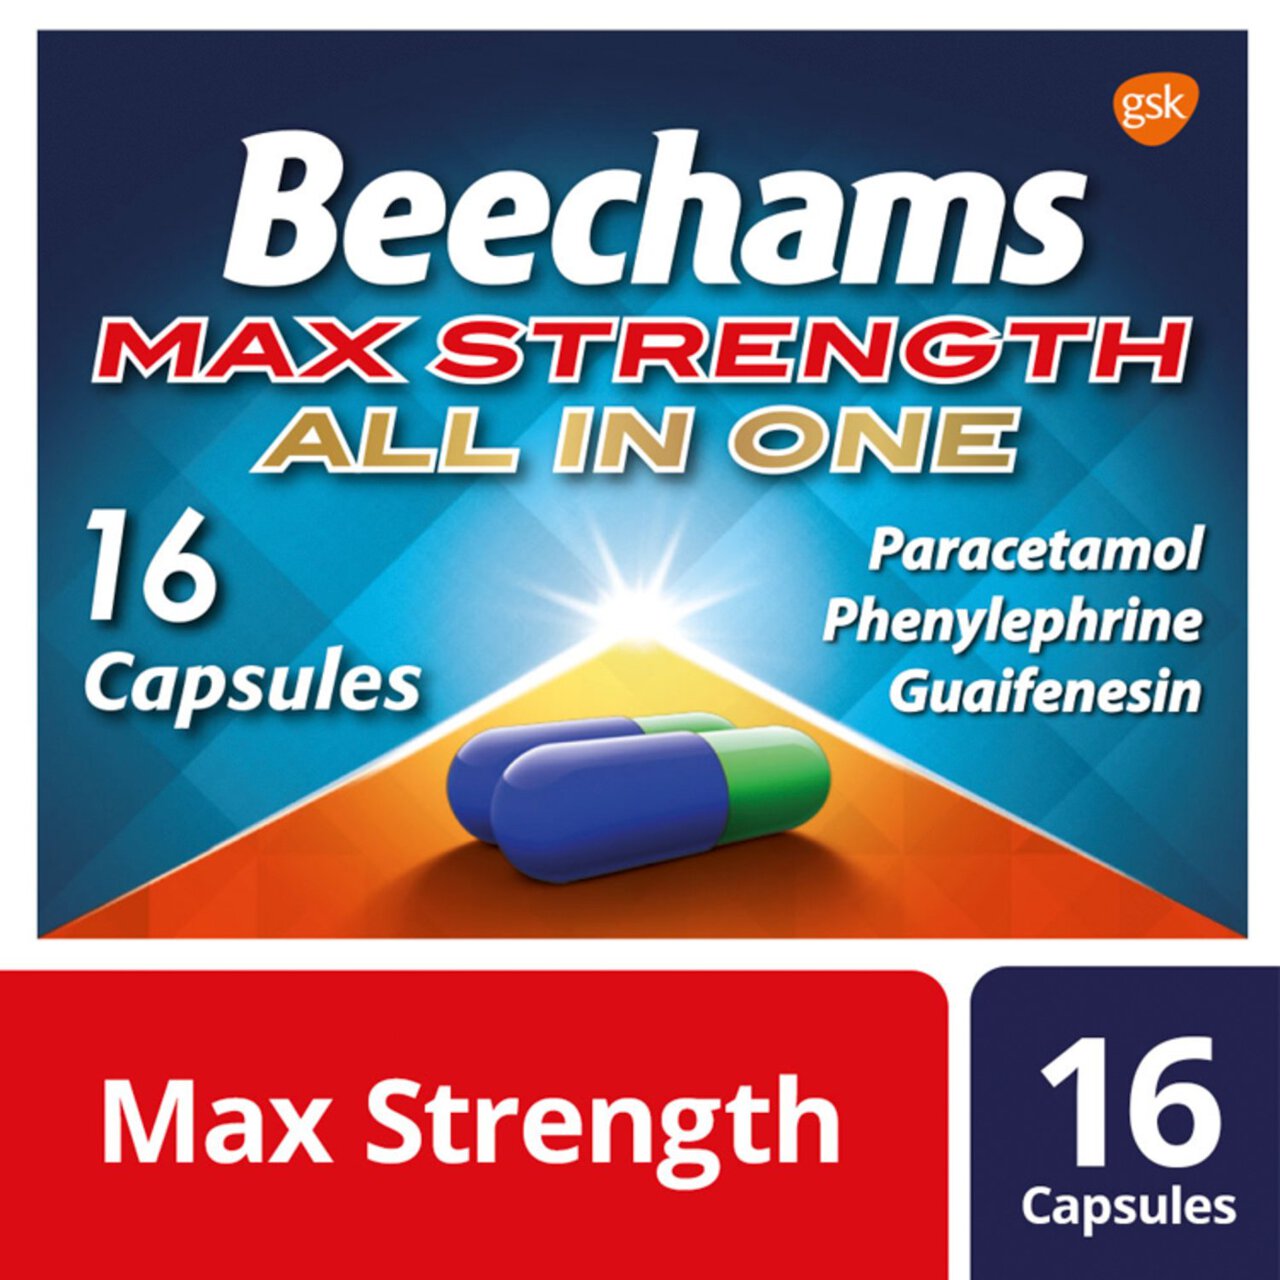 Beechams Cold & Flu Max Strength Cough & Congestion Relief  Capsules 16 16 per pack